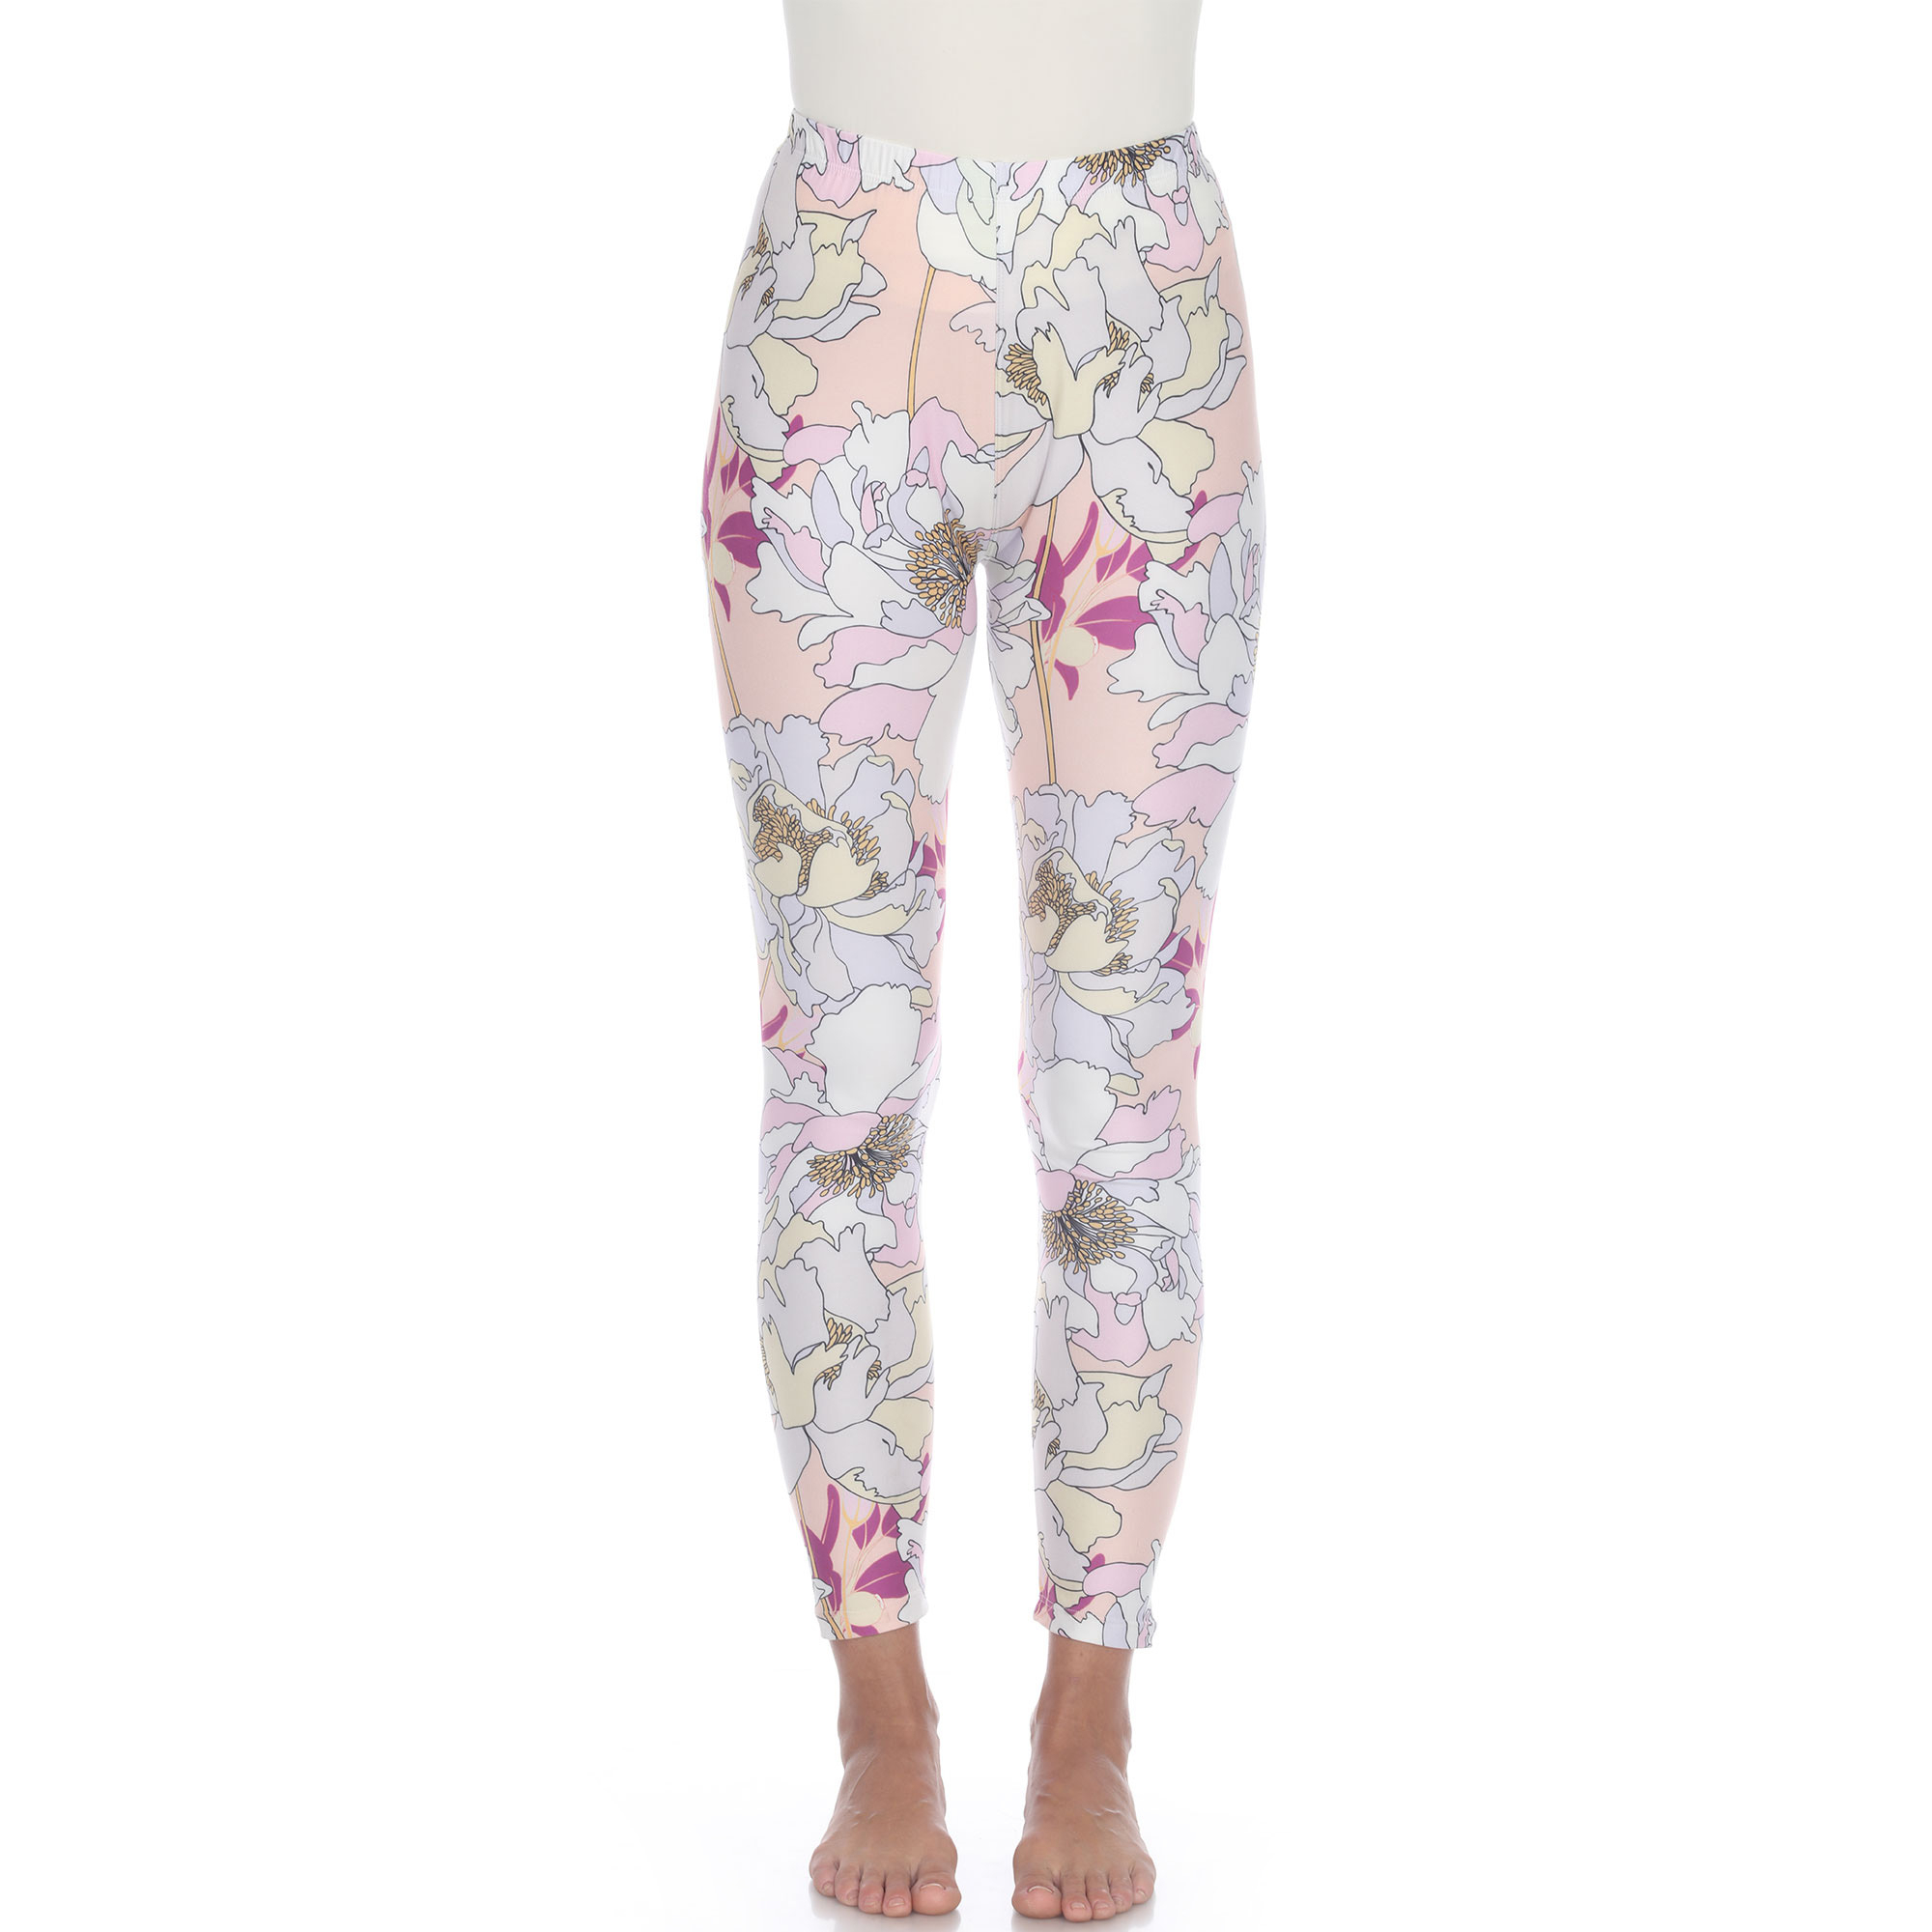 White Mark Women's Tropical Print Stretch Leggings - Coral Pink Flower, One Size